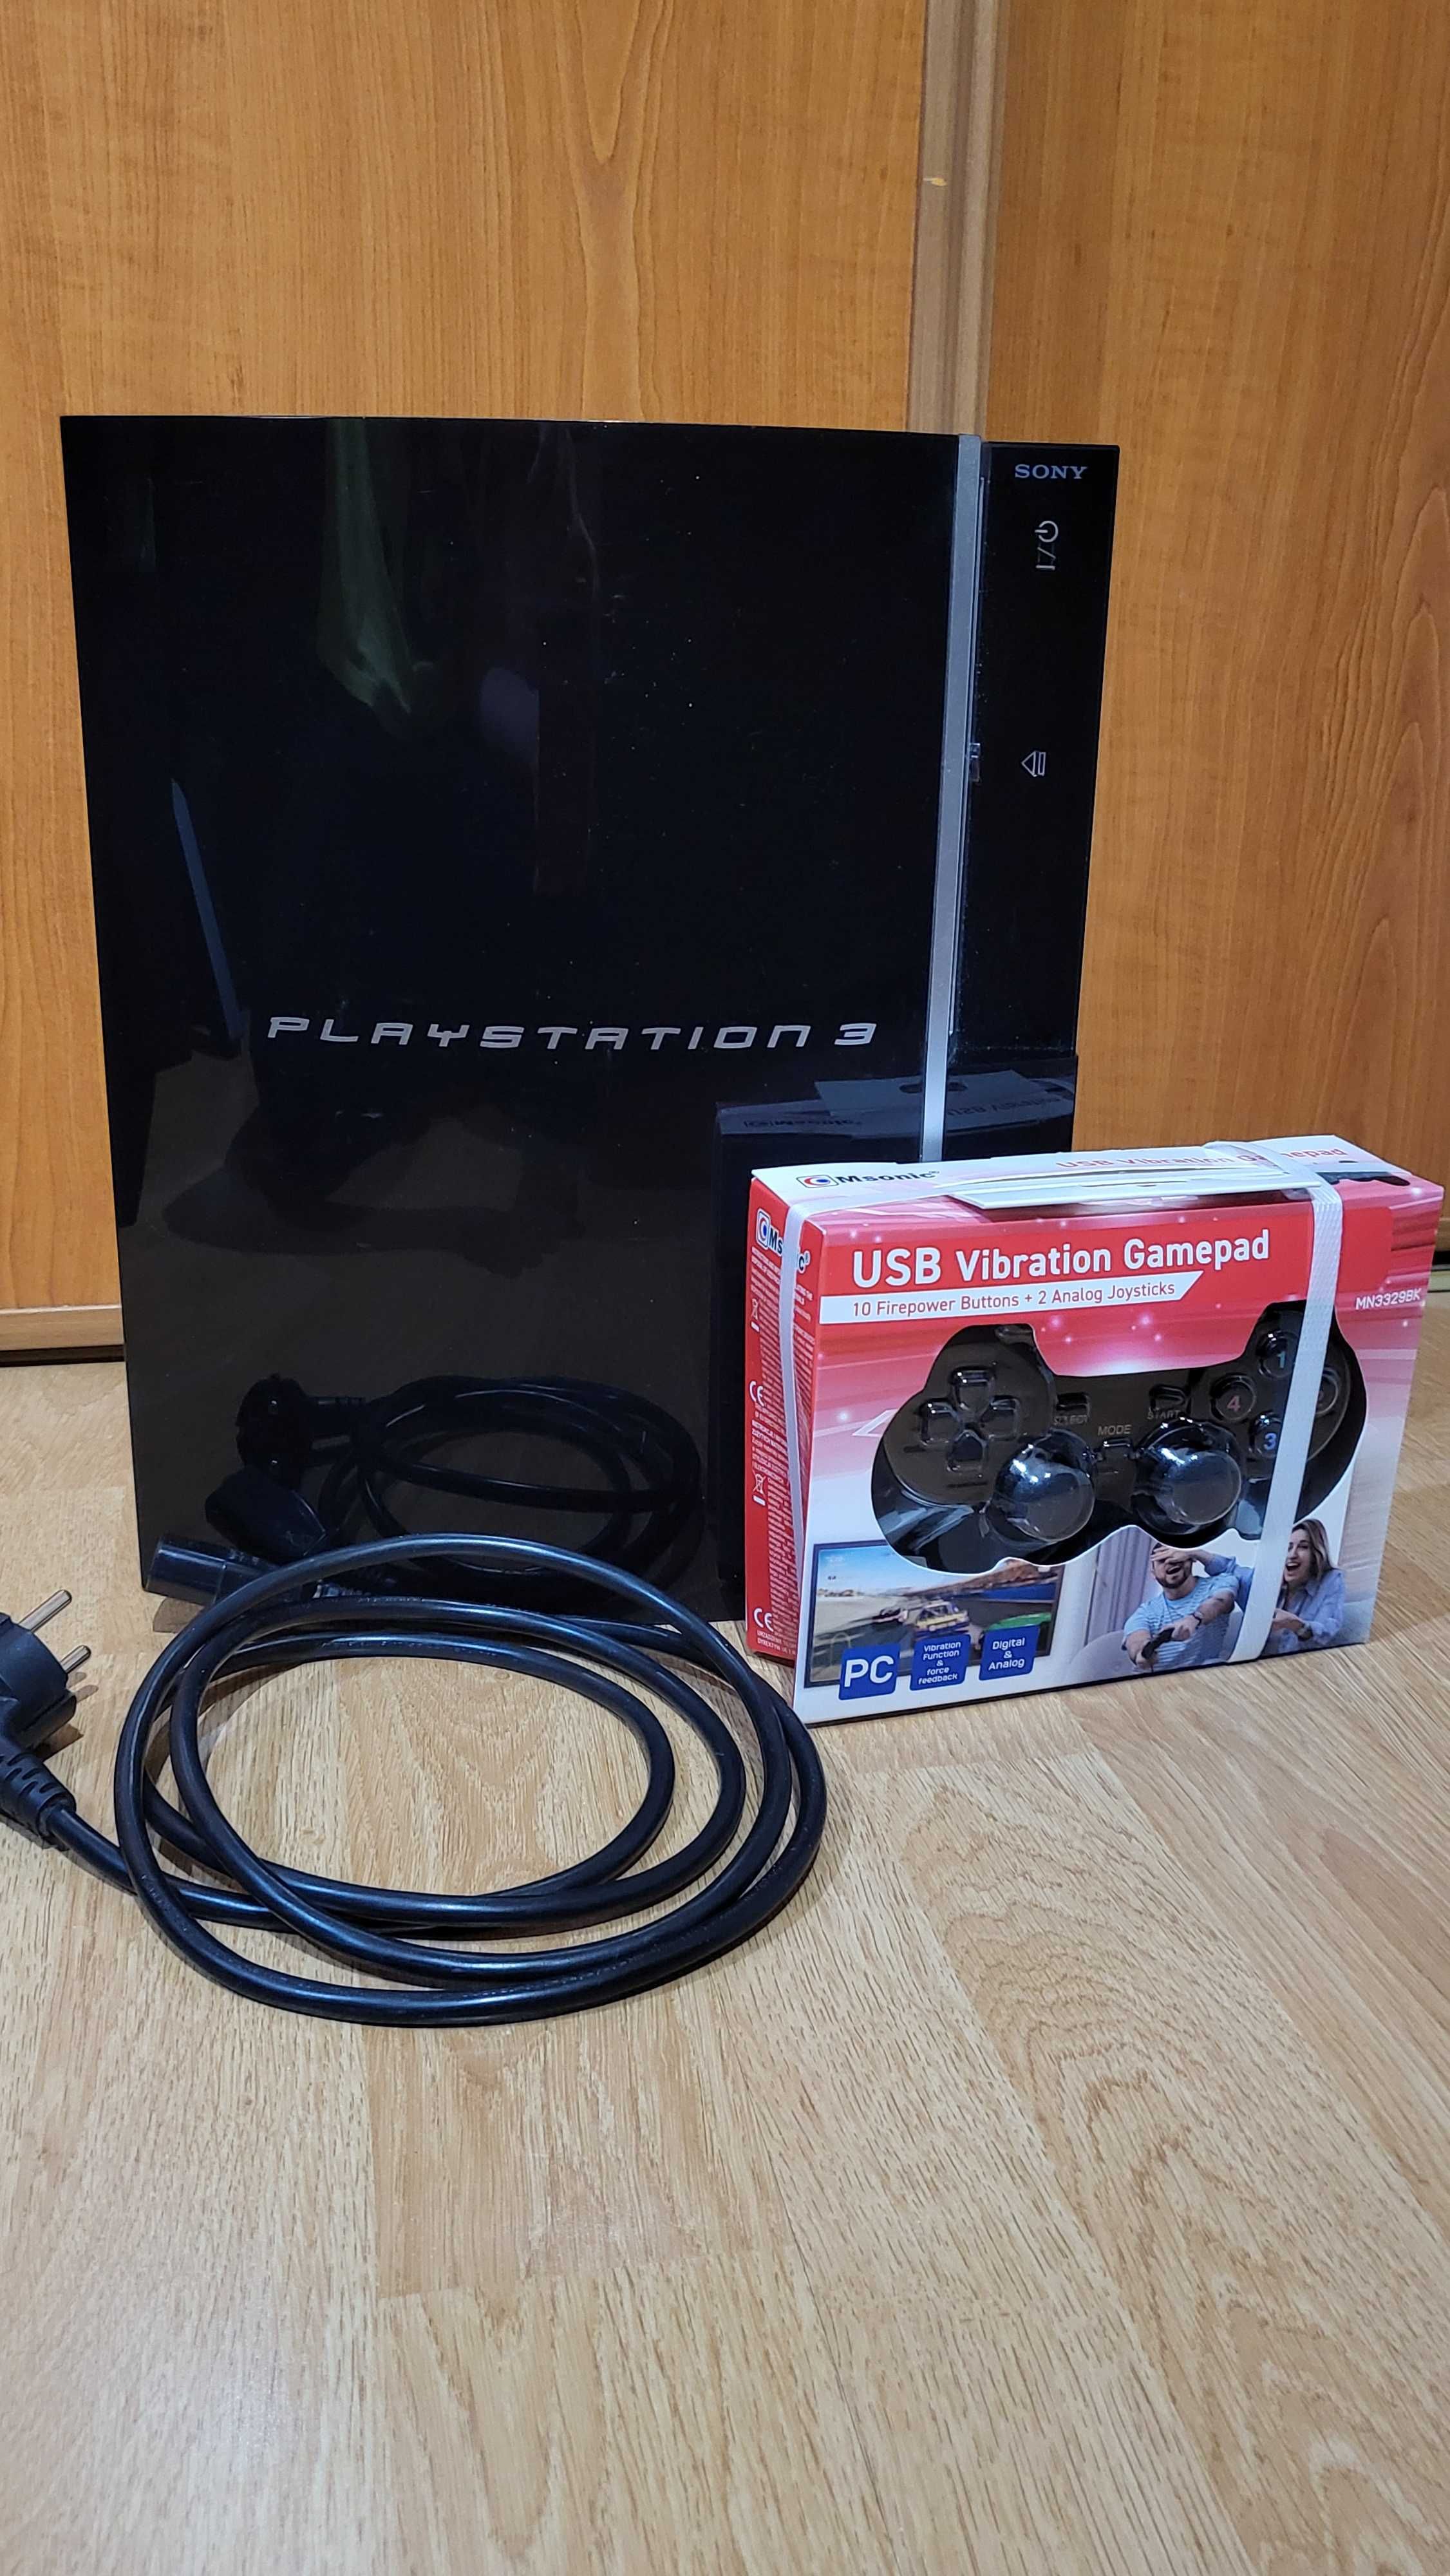 PS3 CECHL03 80GB SSD, Evilnat 4.91, nowy pad